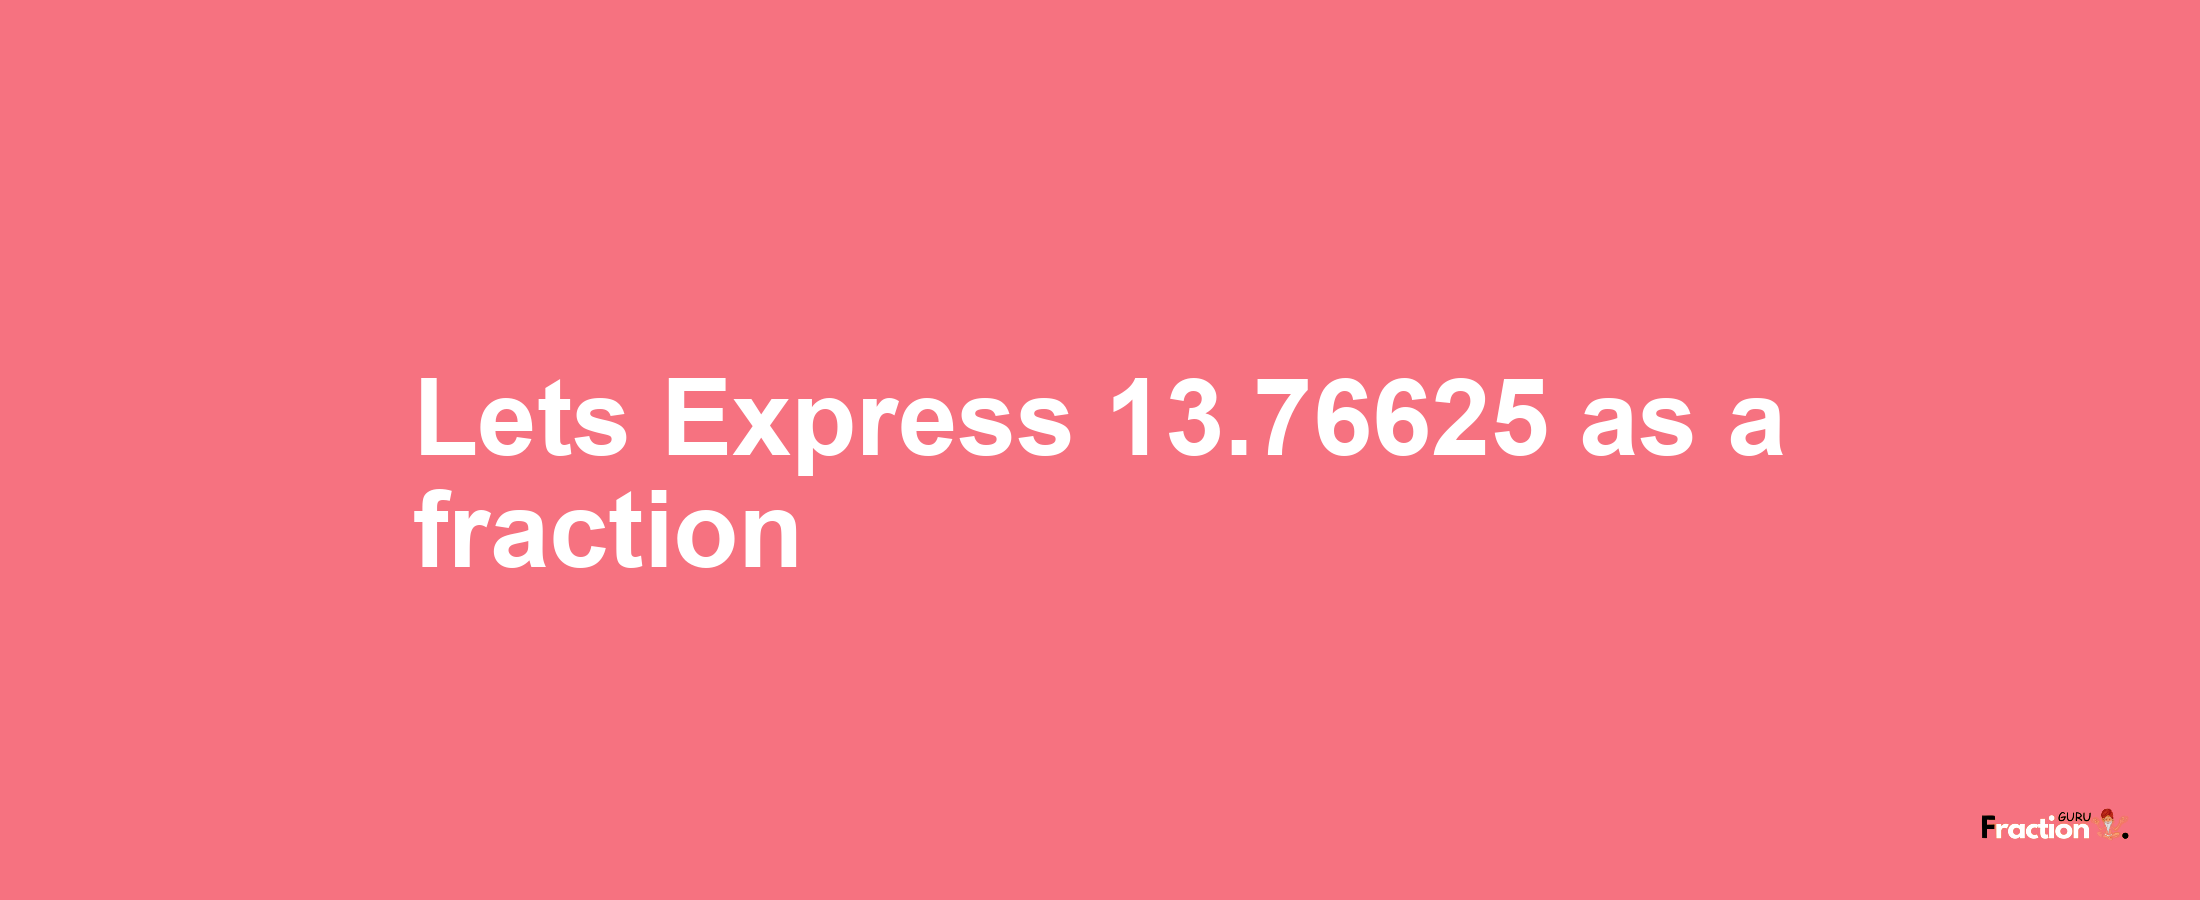 Lets Express 13.76625 as afraction